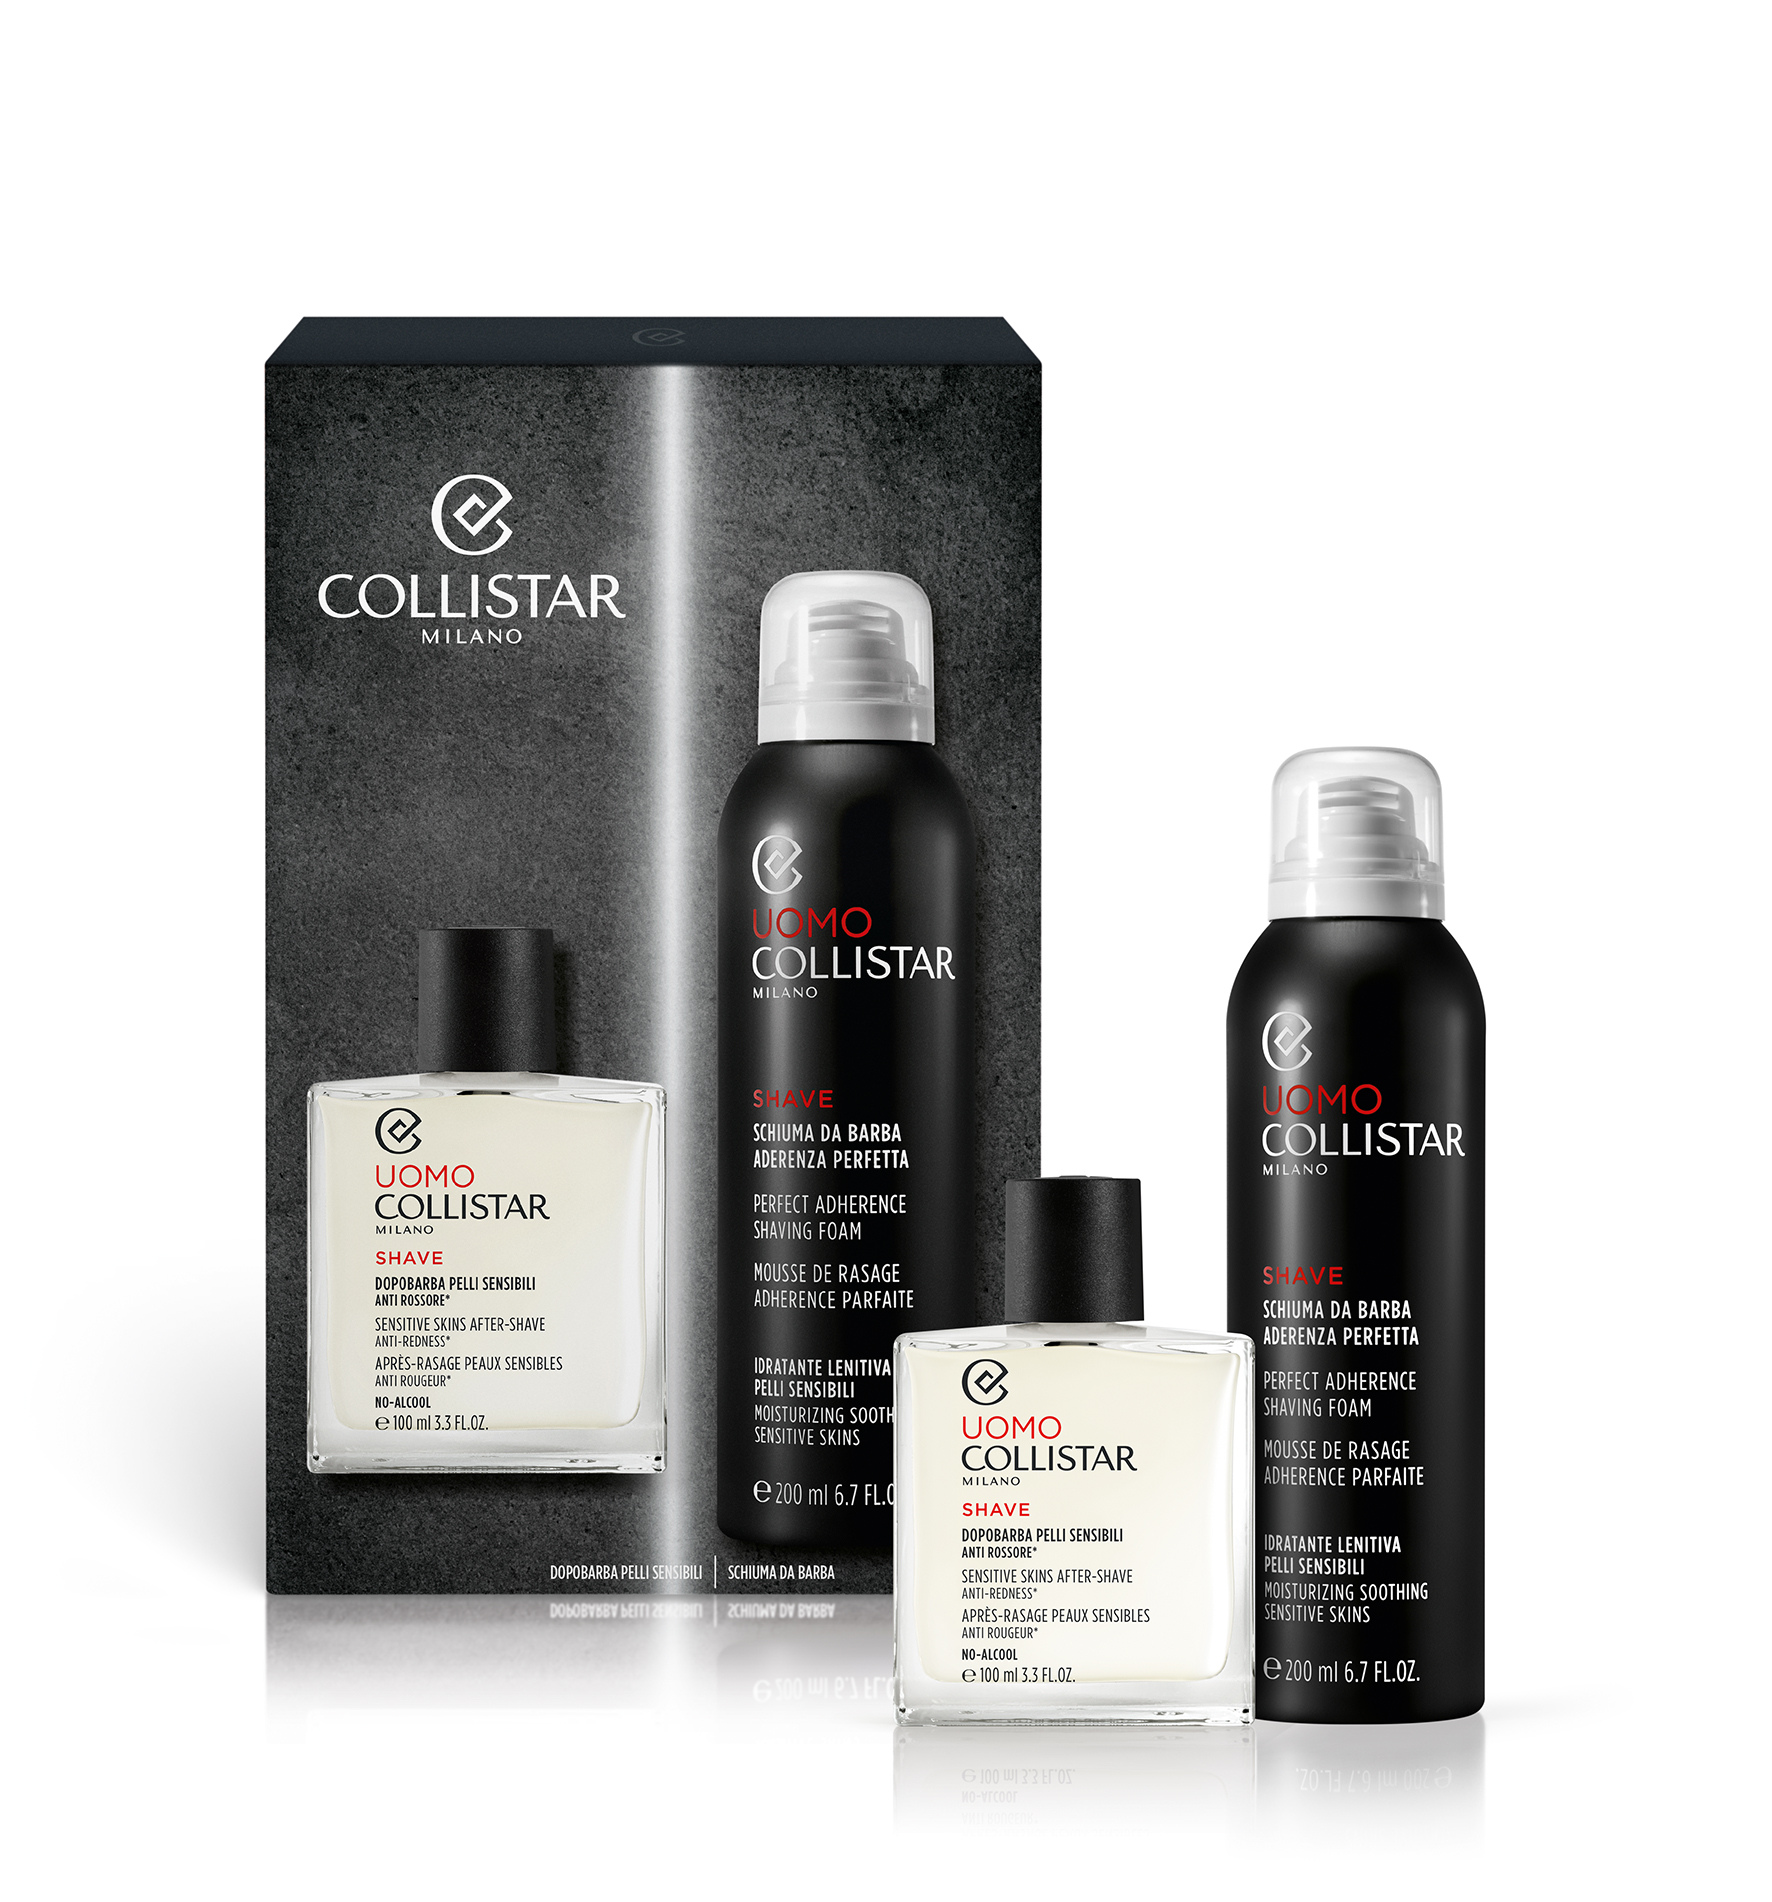 PERFECT ADHERENCE SHAVING FOAM MOISTURIZING SOOTHING SENSITIVE SKIN 200 ml - GIFT IDEAS | Collistar - Shop Online Ufficiale